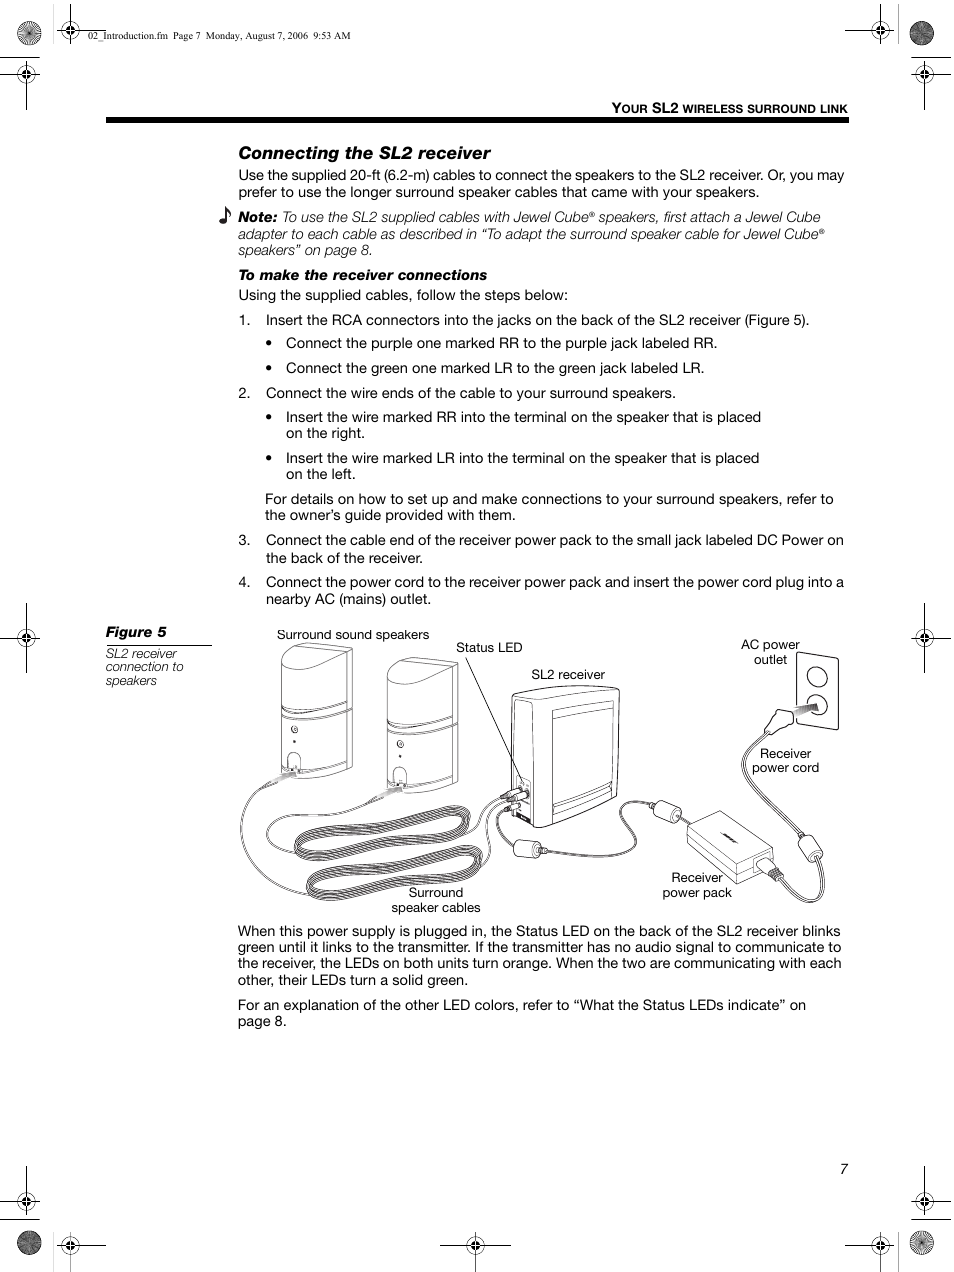 Connecting the sl2 receiver | Bose SL2 User Manual | Page 7 / 12